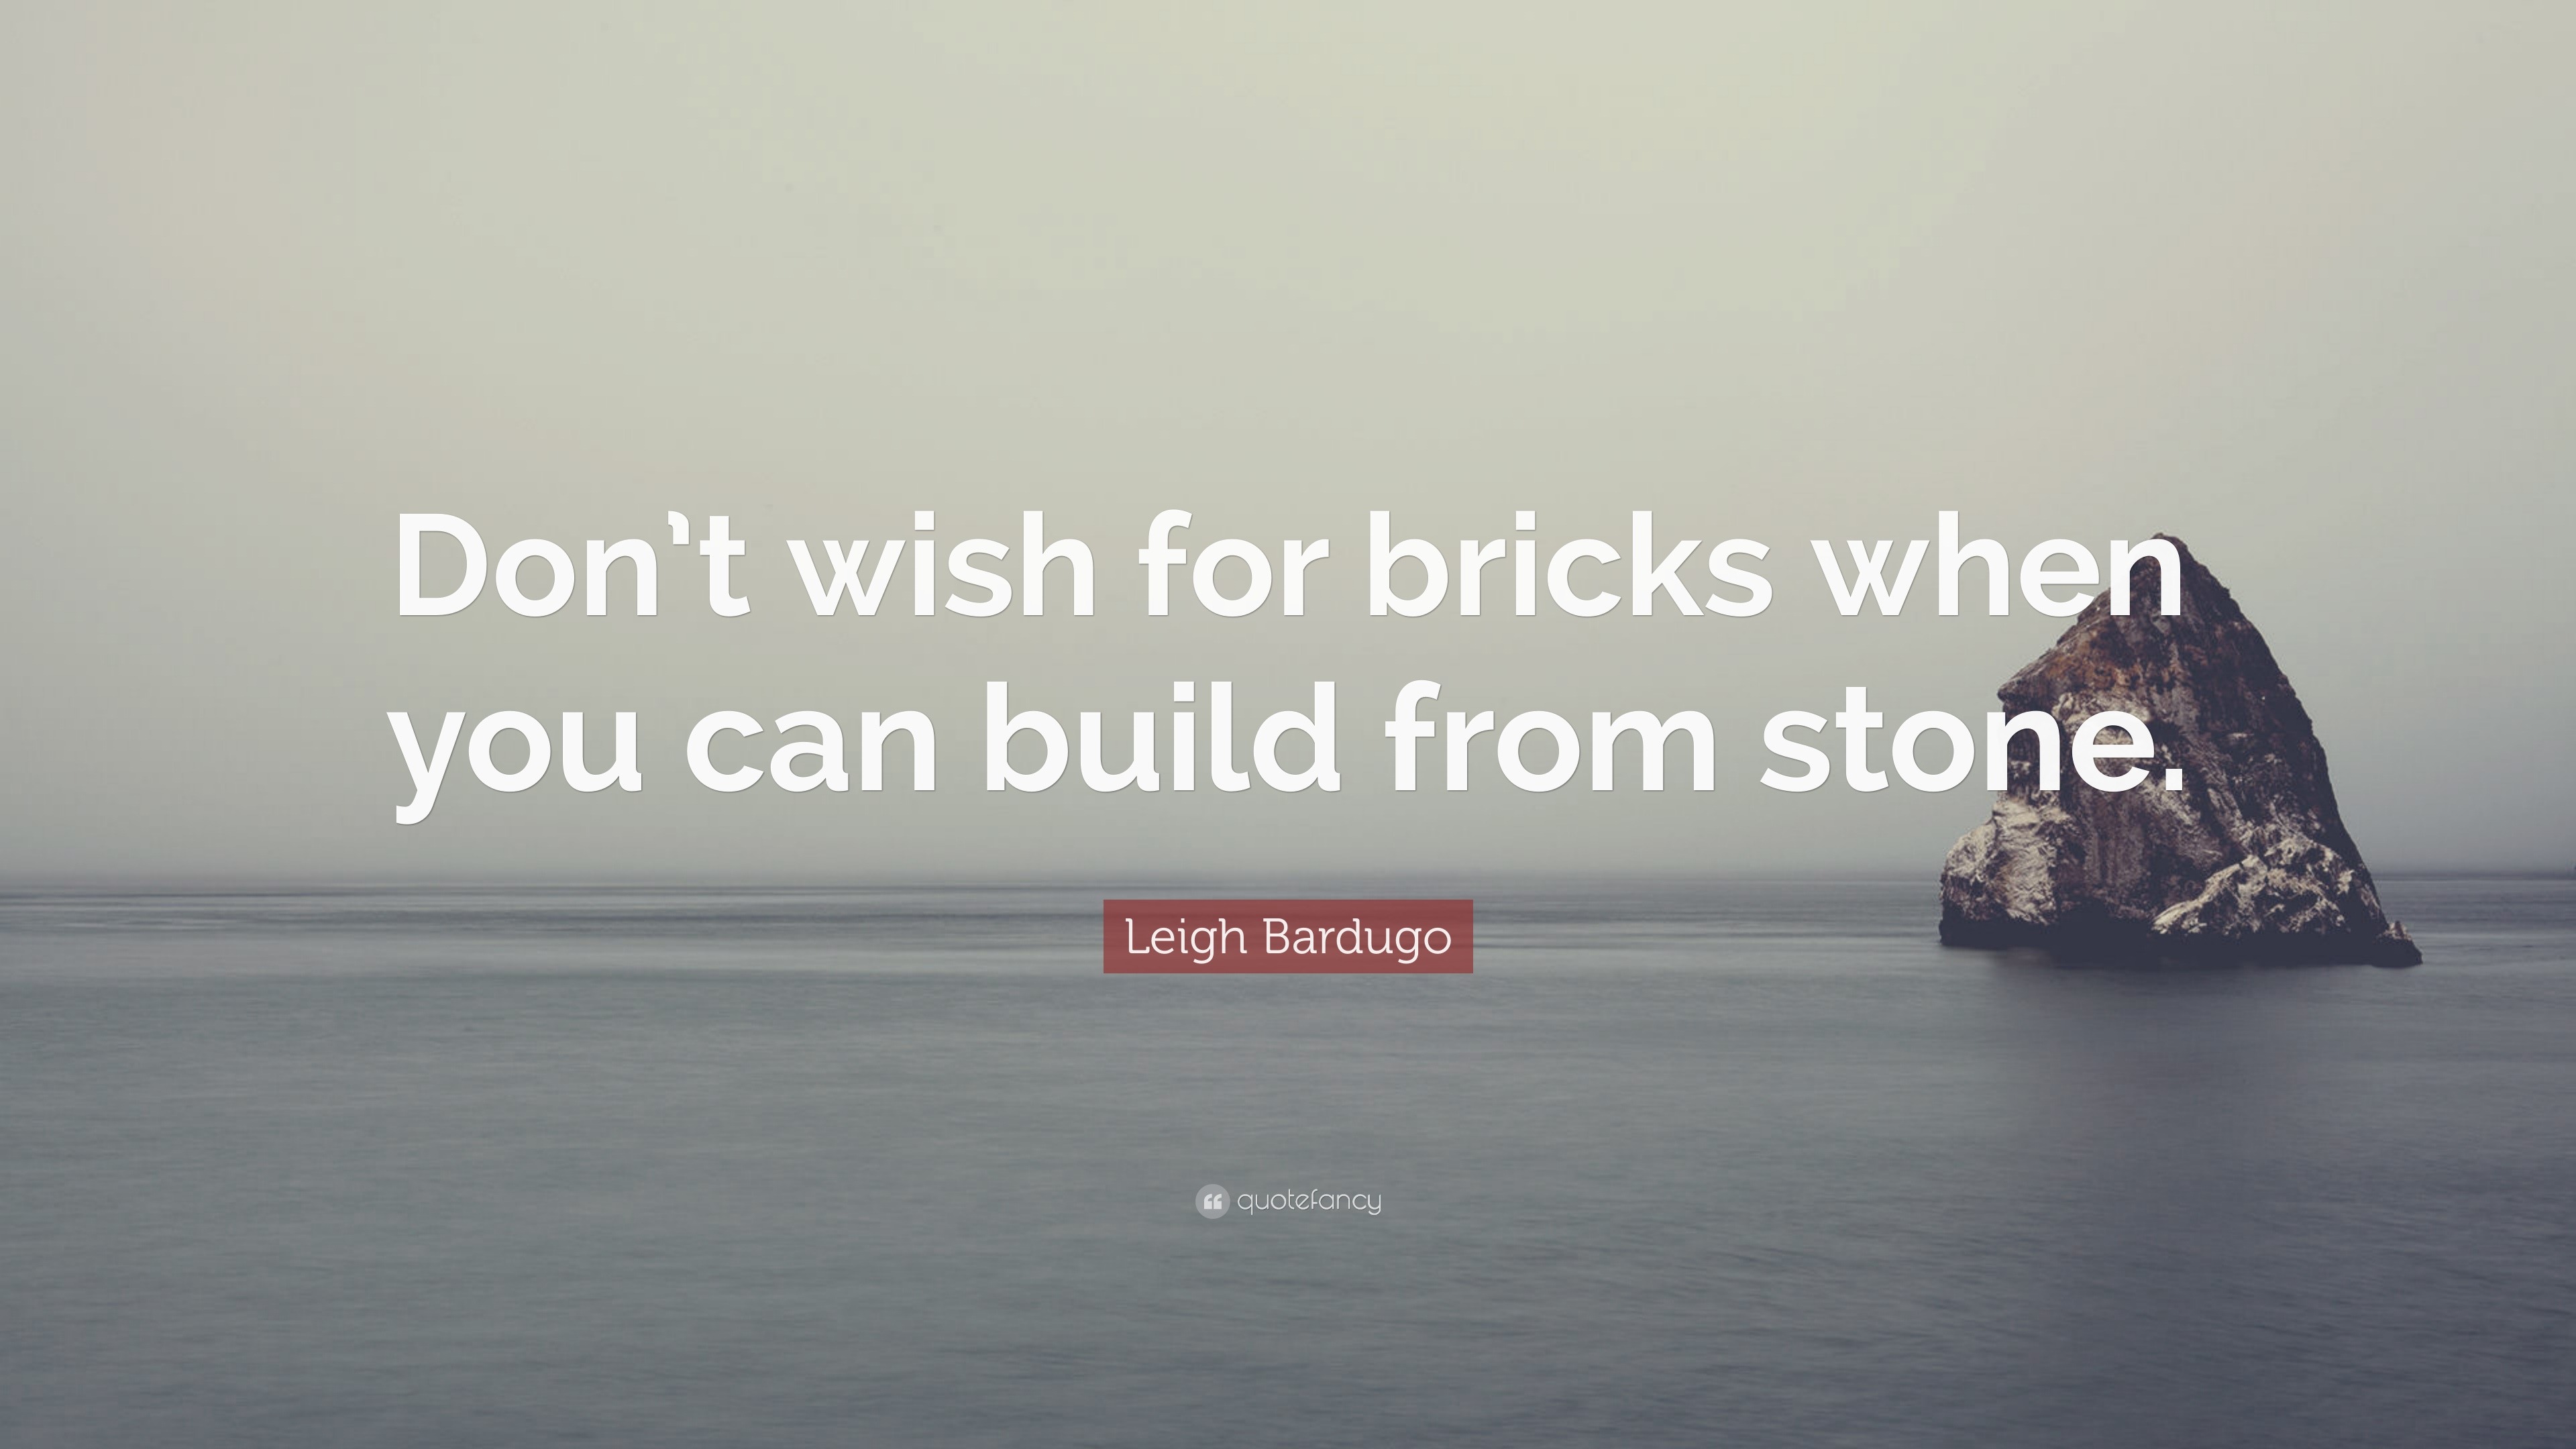 Leigh Bardugo Quote: “Don’t wish for bricks when you can build from stone.”